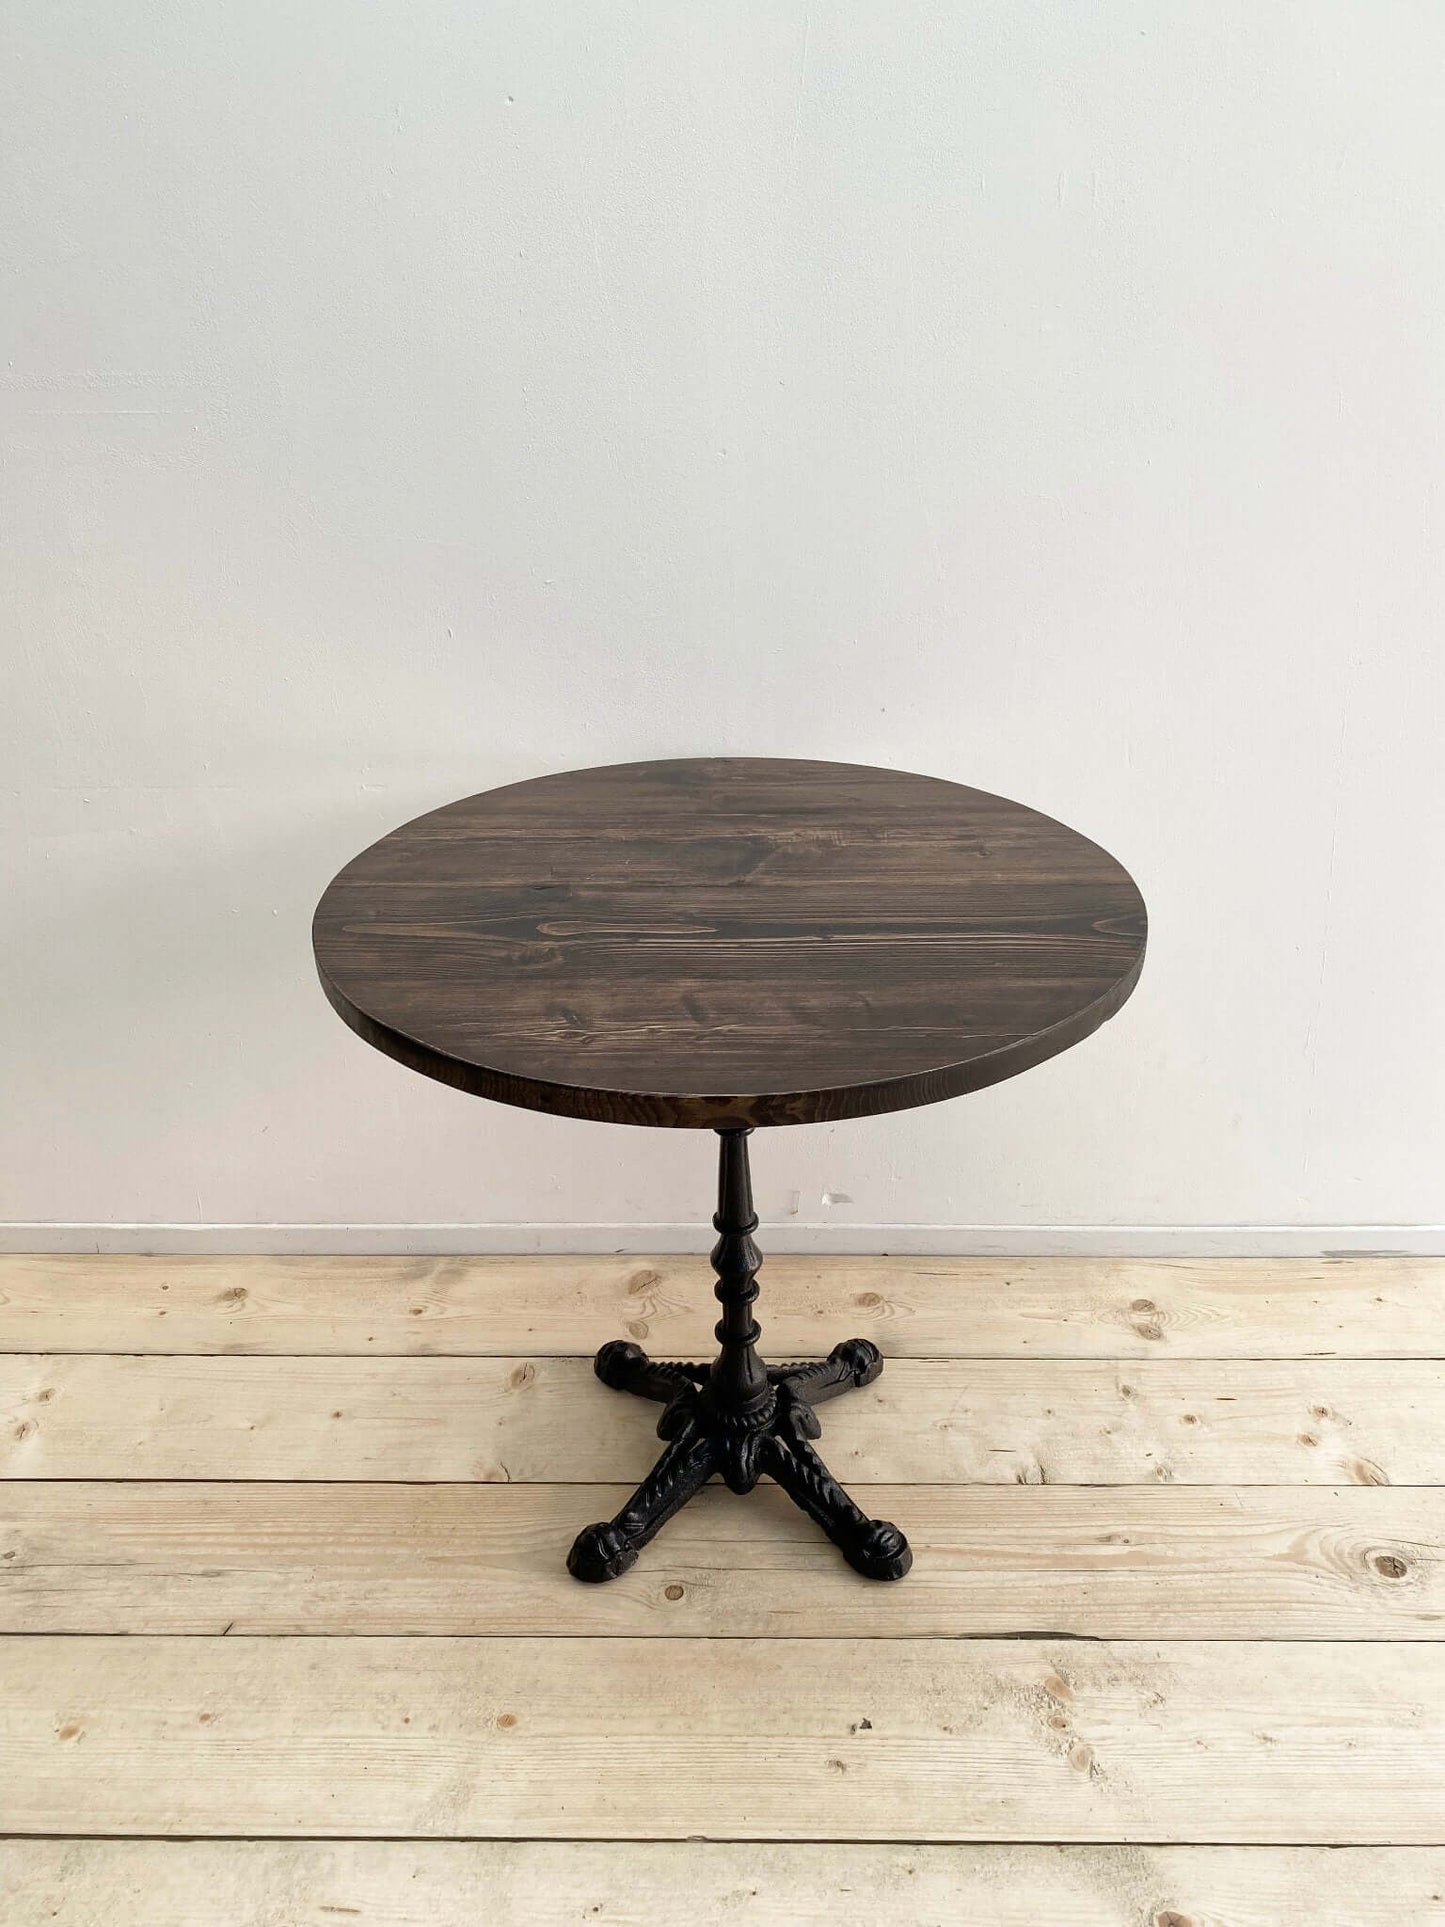 Reclaimed wood circle dining table with pedestal.